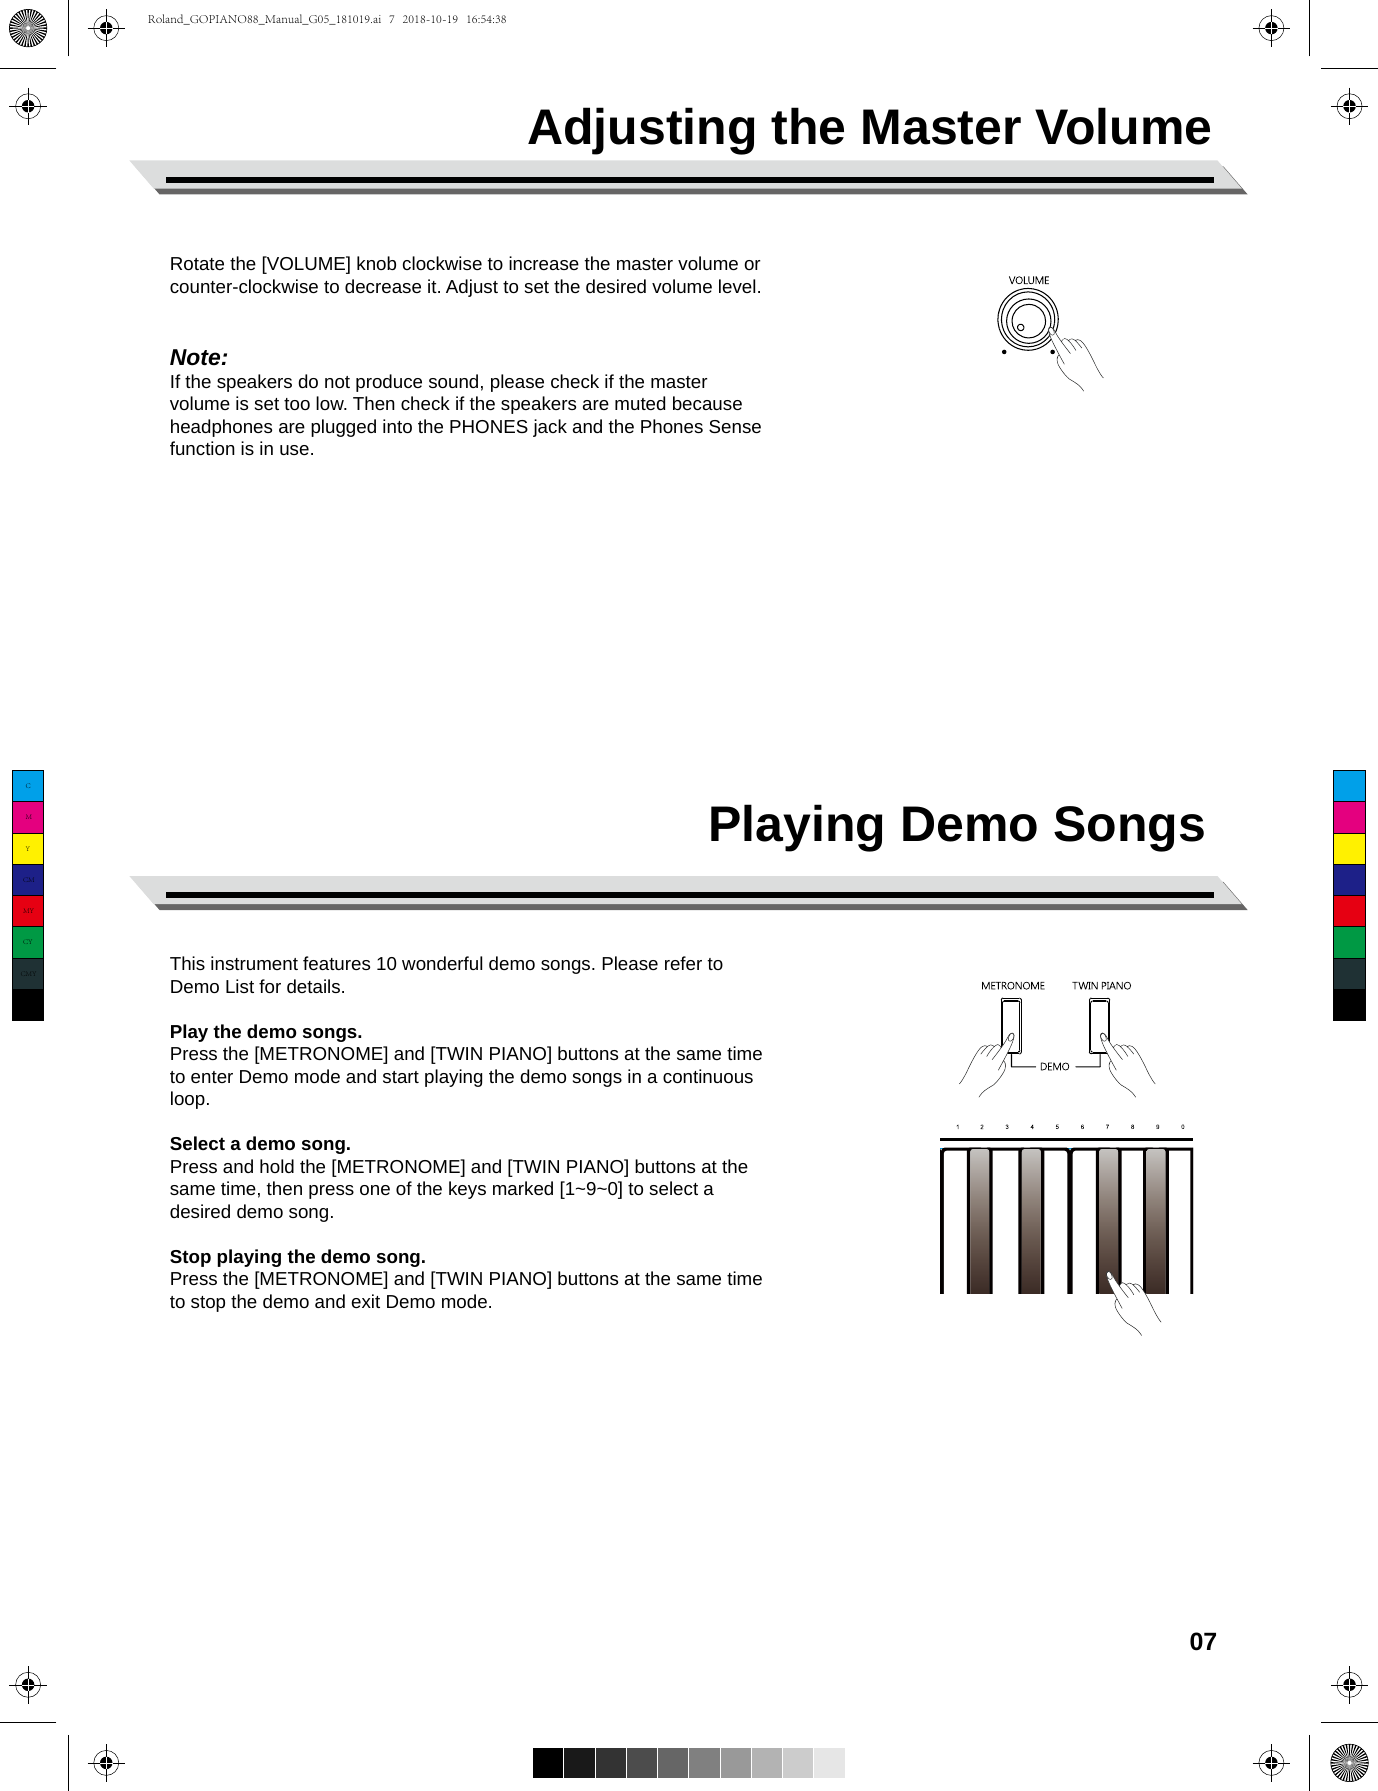 Playing Demo SongsThis instrument features 10 wonderful demo songs. Please refer to Demo List for details.Play the demo songs.Press the [METRONOME] and [TWIN PIANO] buttons at the same time to enter Demo mode and start playing the demo songs in a continuous loop. Select a demo song.Press and hold the [METRONOME] and [TWIN PIANO] buttons at the same time, then press one of the keys marked [1~9~0] to select a desired demo song.Stop playing the demo song. Press the [METRONOME] and [TWIN PIANO] buttons at the same time to stop the demo and exit Demo mode.Rotate the [VOLUME] knob clockwise to increase the master volume or counter-clockwise to decrease it. Adjust to set the desired volume level.Note:If the speakers do not produce sound, please check if the mastervolume is set too low. Then check if the speakers are muted because headphones are plugged into the PHONES jack and the Phones Sense function is in use.07Adjusting the Master VolumeCMYCMMYCYCMYKRoland_GOPIANO88_Manual_G05_181019.ai   7   2018-10-19   16:54:38Roland_GOPIANO88_Manual_G05_181019.ai   7   2018-10-19   16:54:38